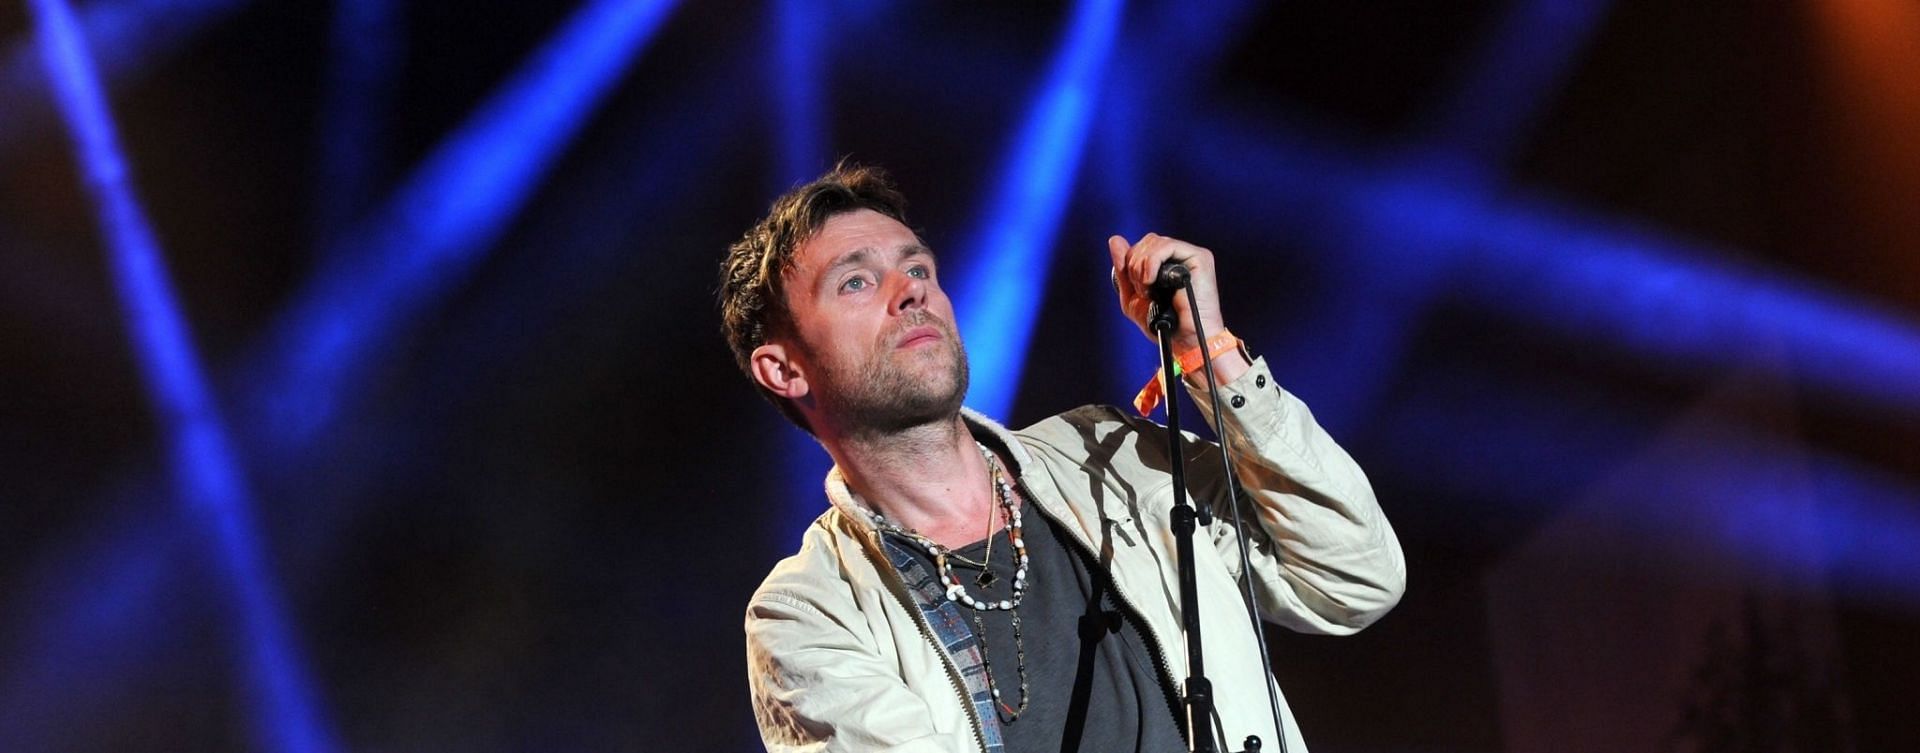 Damon Albarn is the frontman of Blur and founding member of Gorillaz (Image via Getty Images)